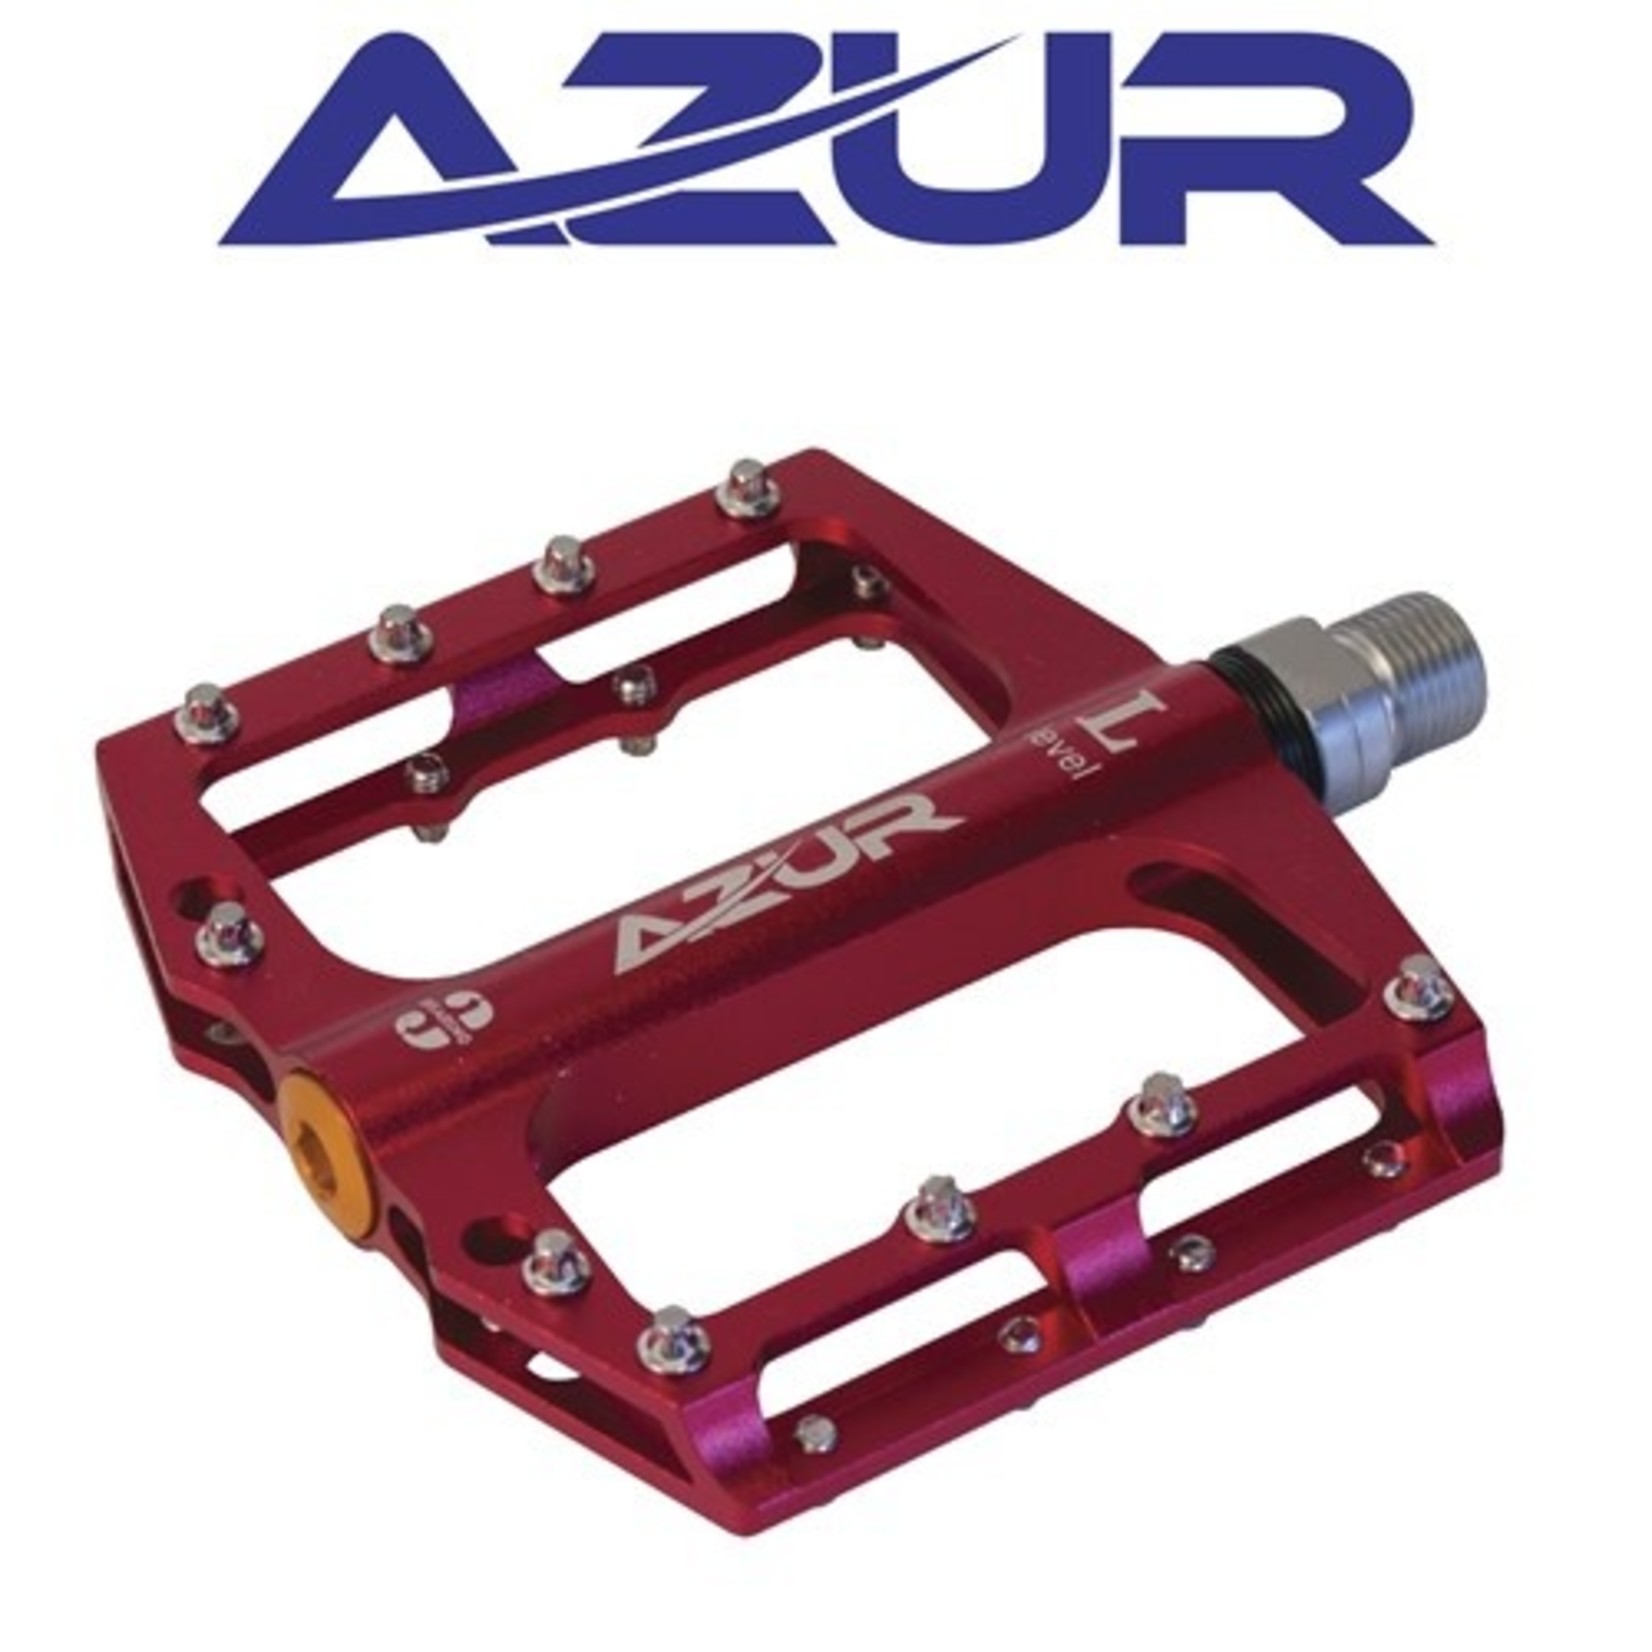 Azur Azur Bike/Cycling Clutch Pedal Sold in Pairs  Size: 107mm x 100mm